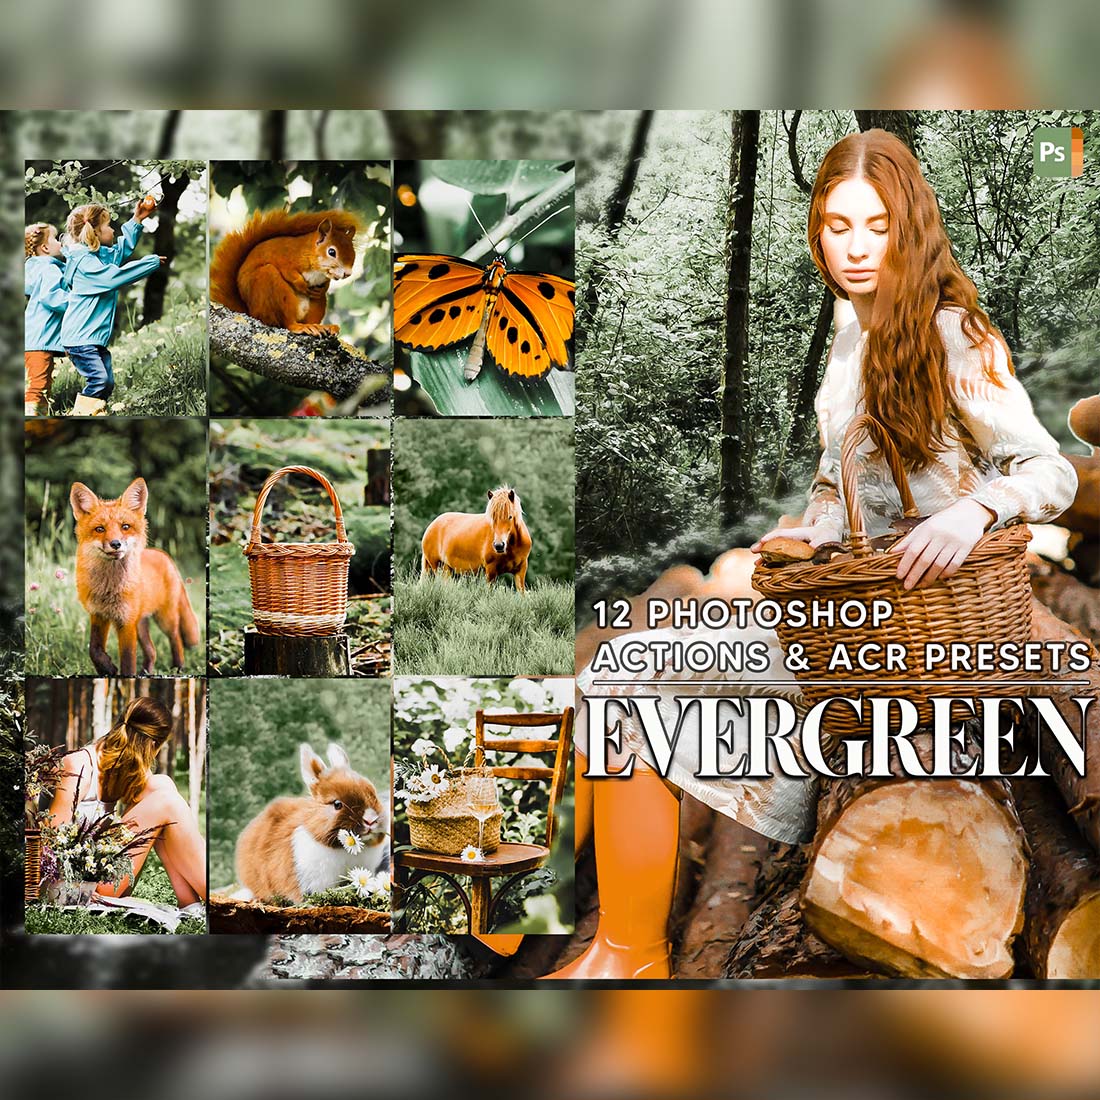 12 Evergreen, Deep Jungle Ps Action, Moody ACR Preset, Green Ps Filter, Landscape Portrait And Lifestyle Theme For Instagram, Blogger cover image.